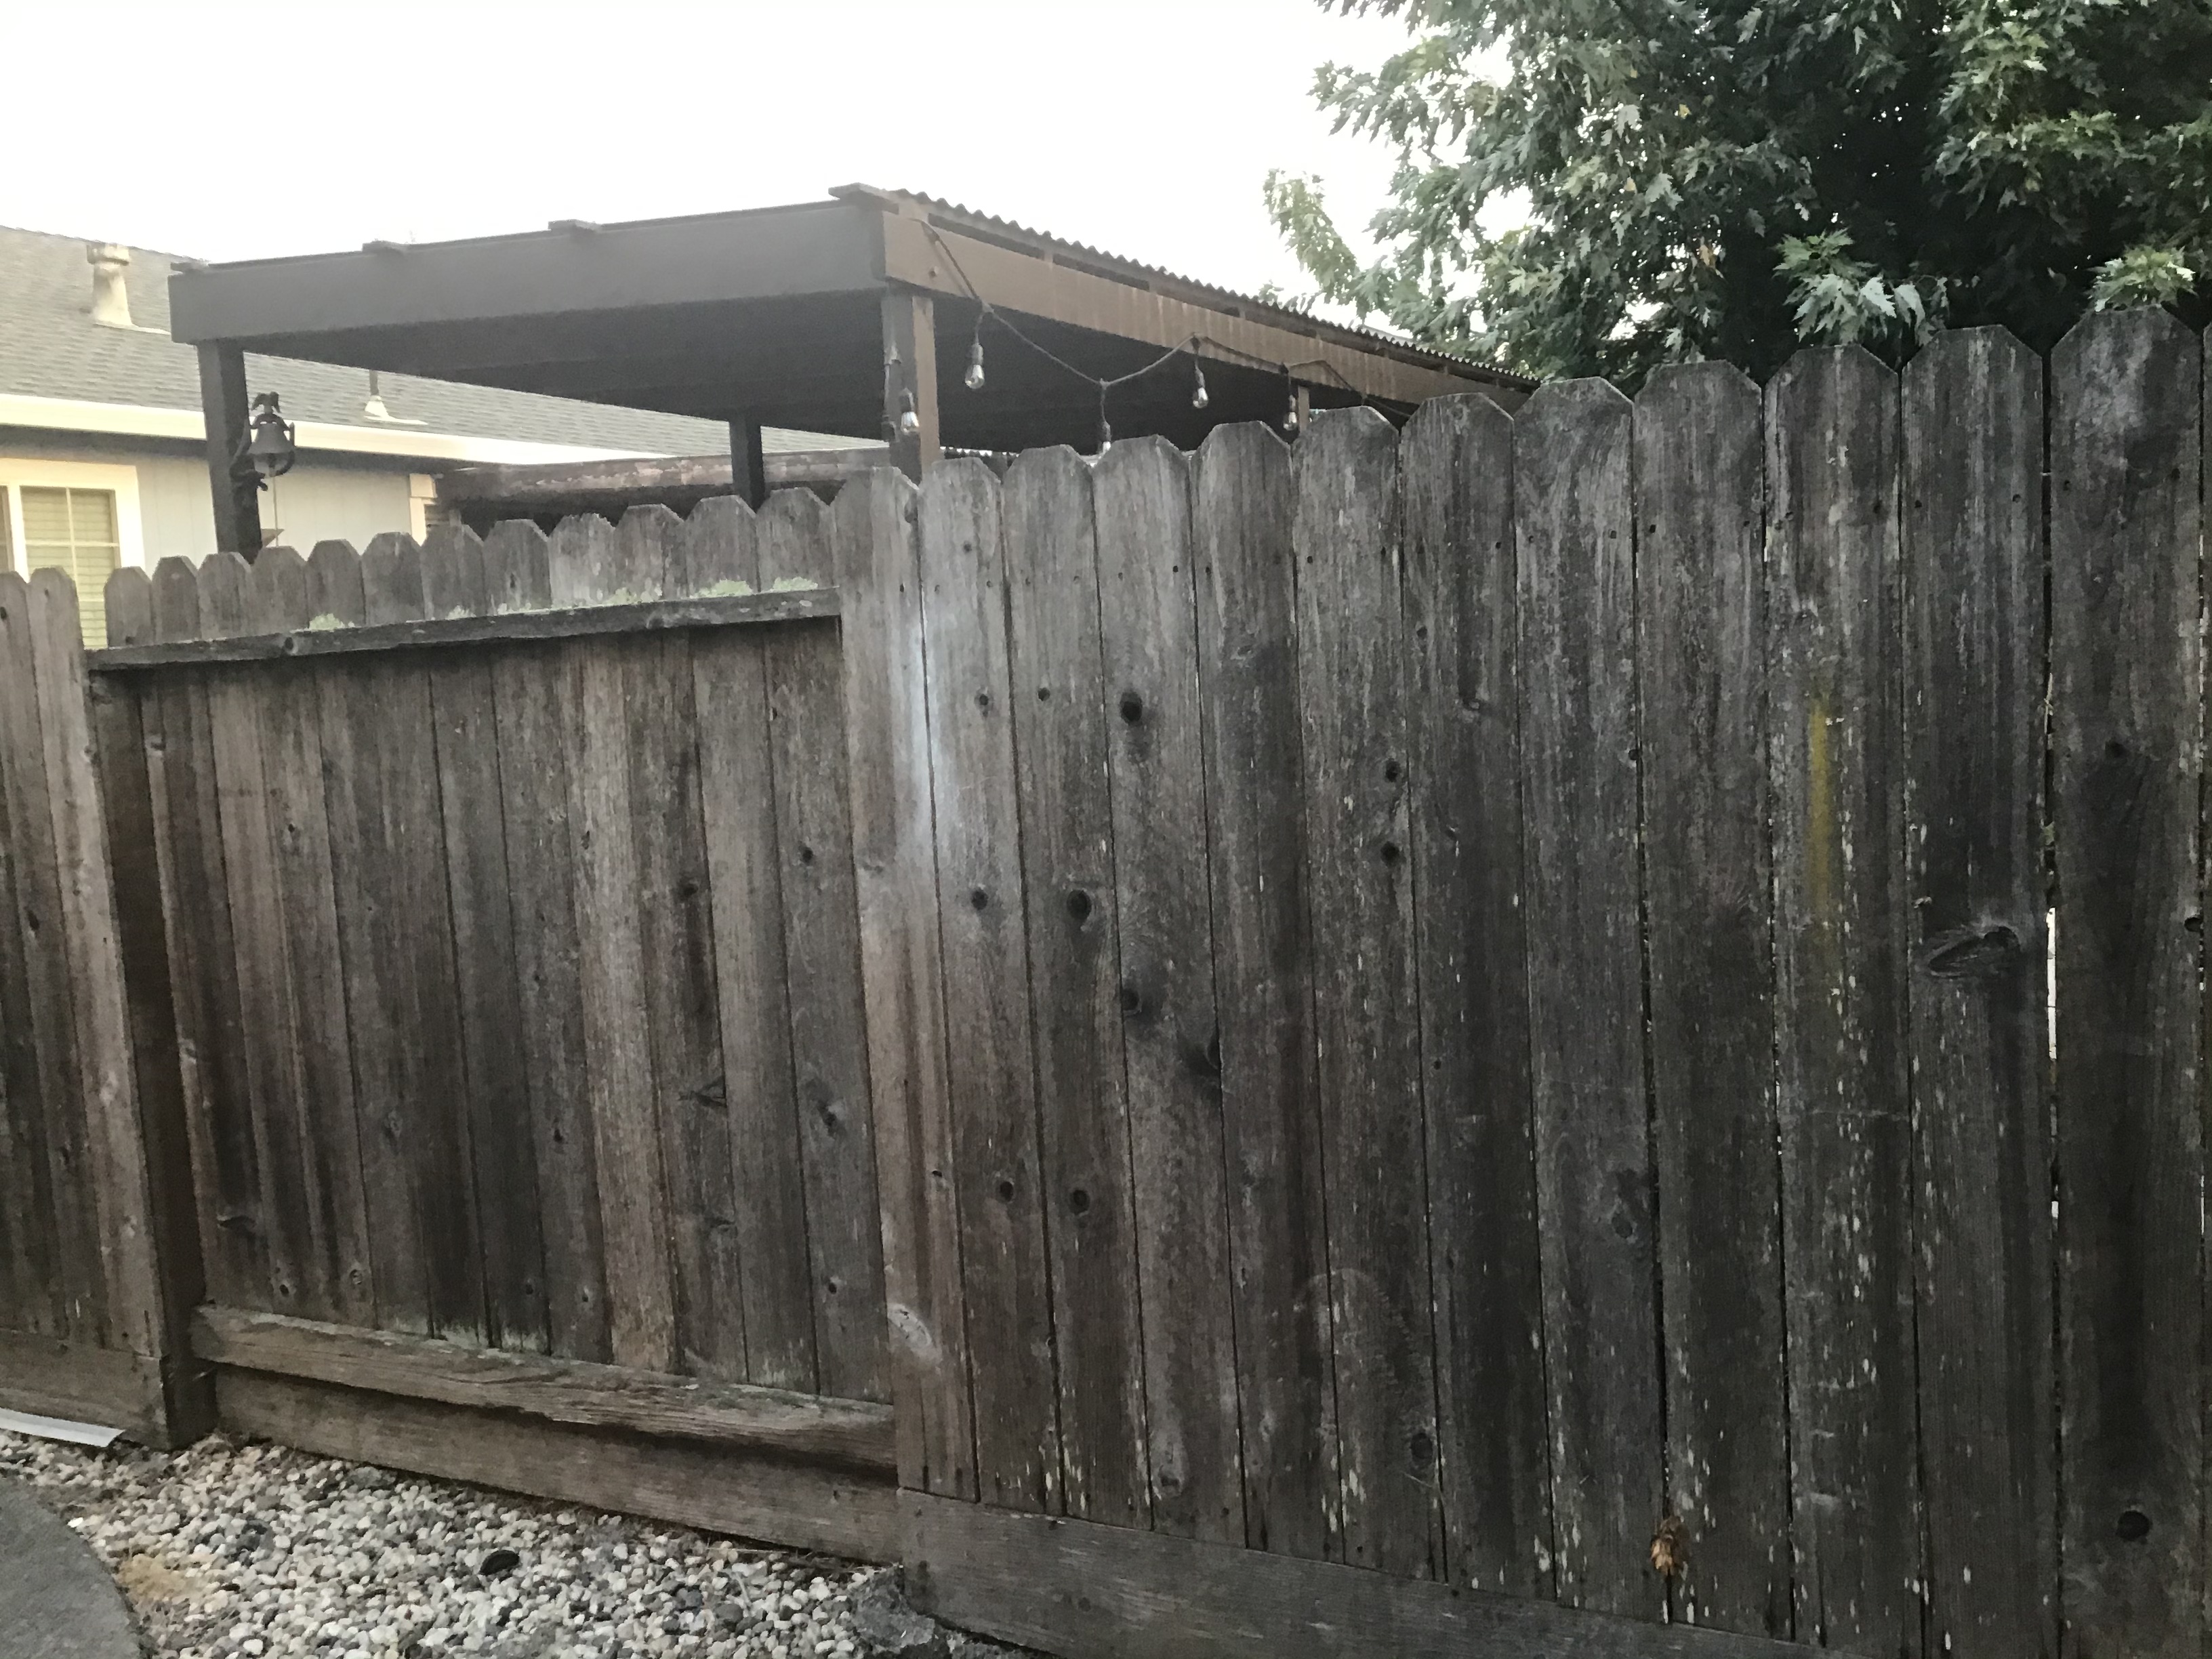 Damage to the fencing was not replaced 